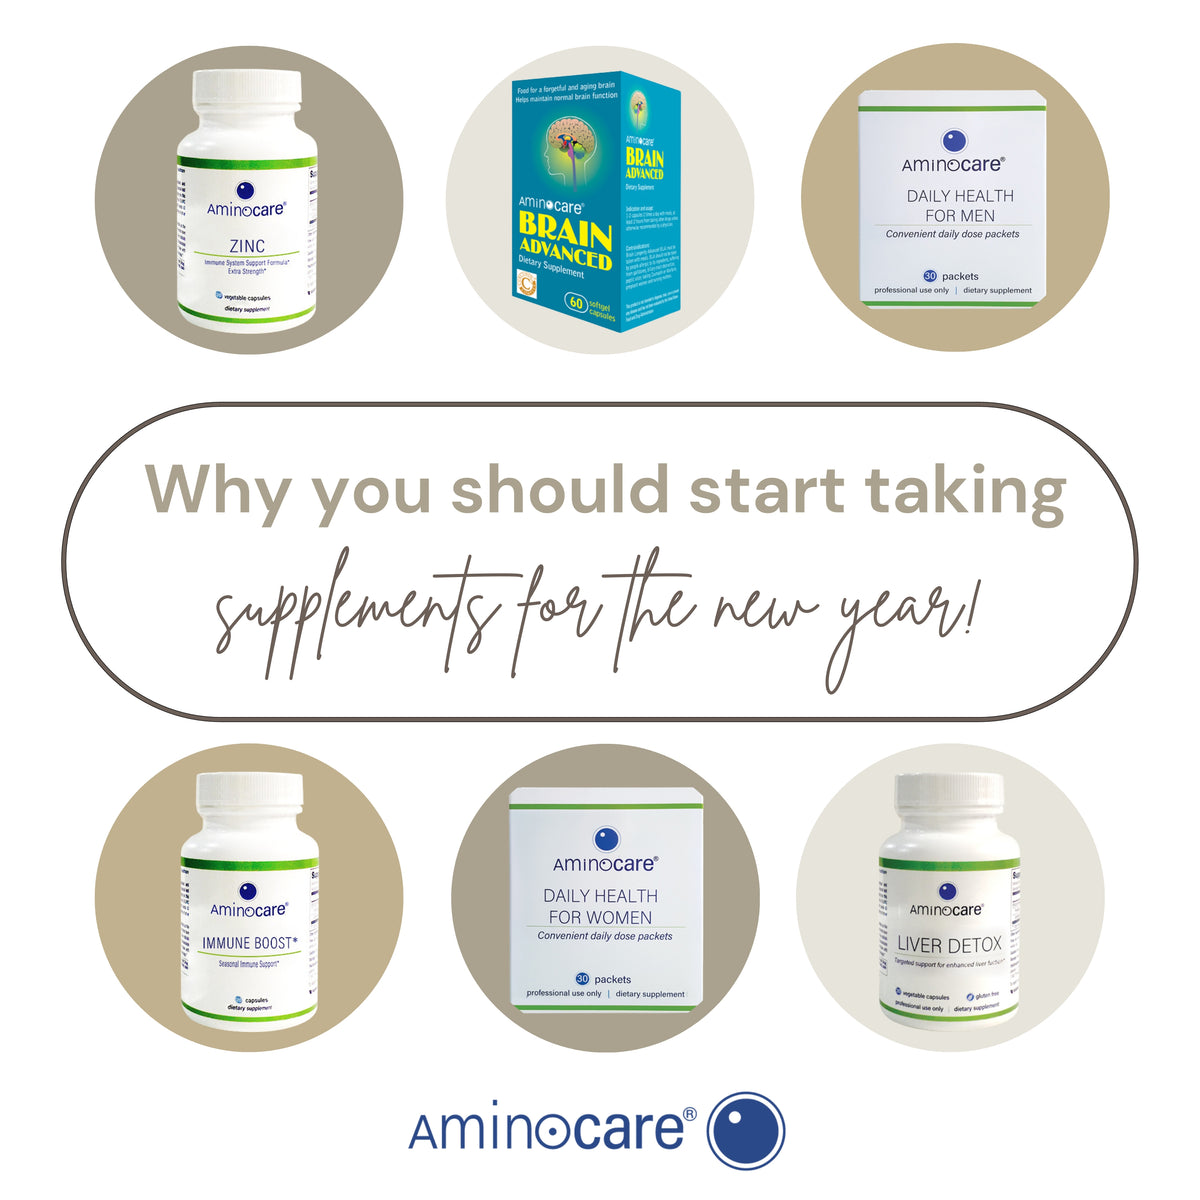 Why Should You Start Taking Aminocare® Supplements?